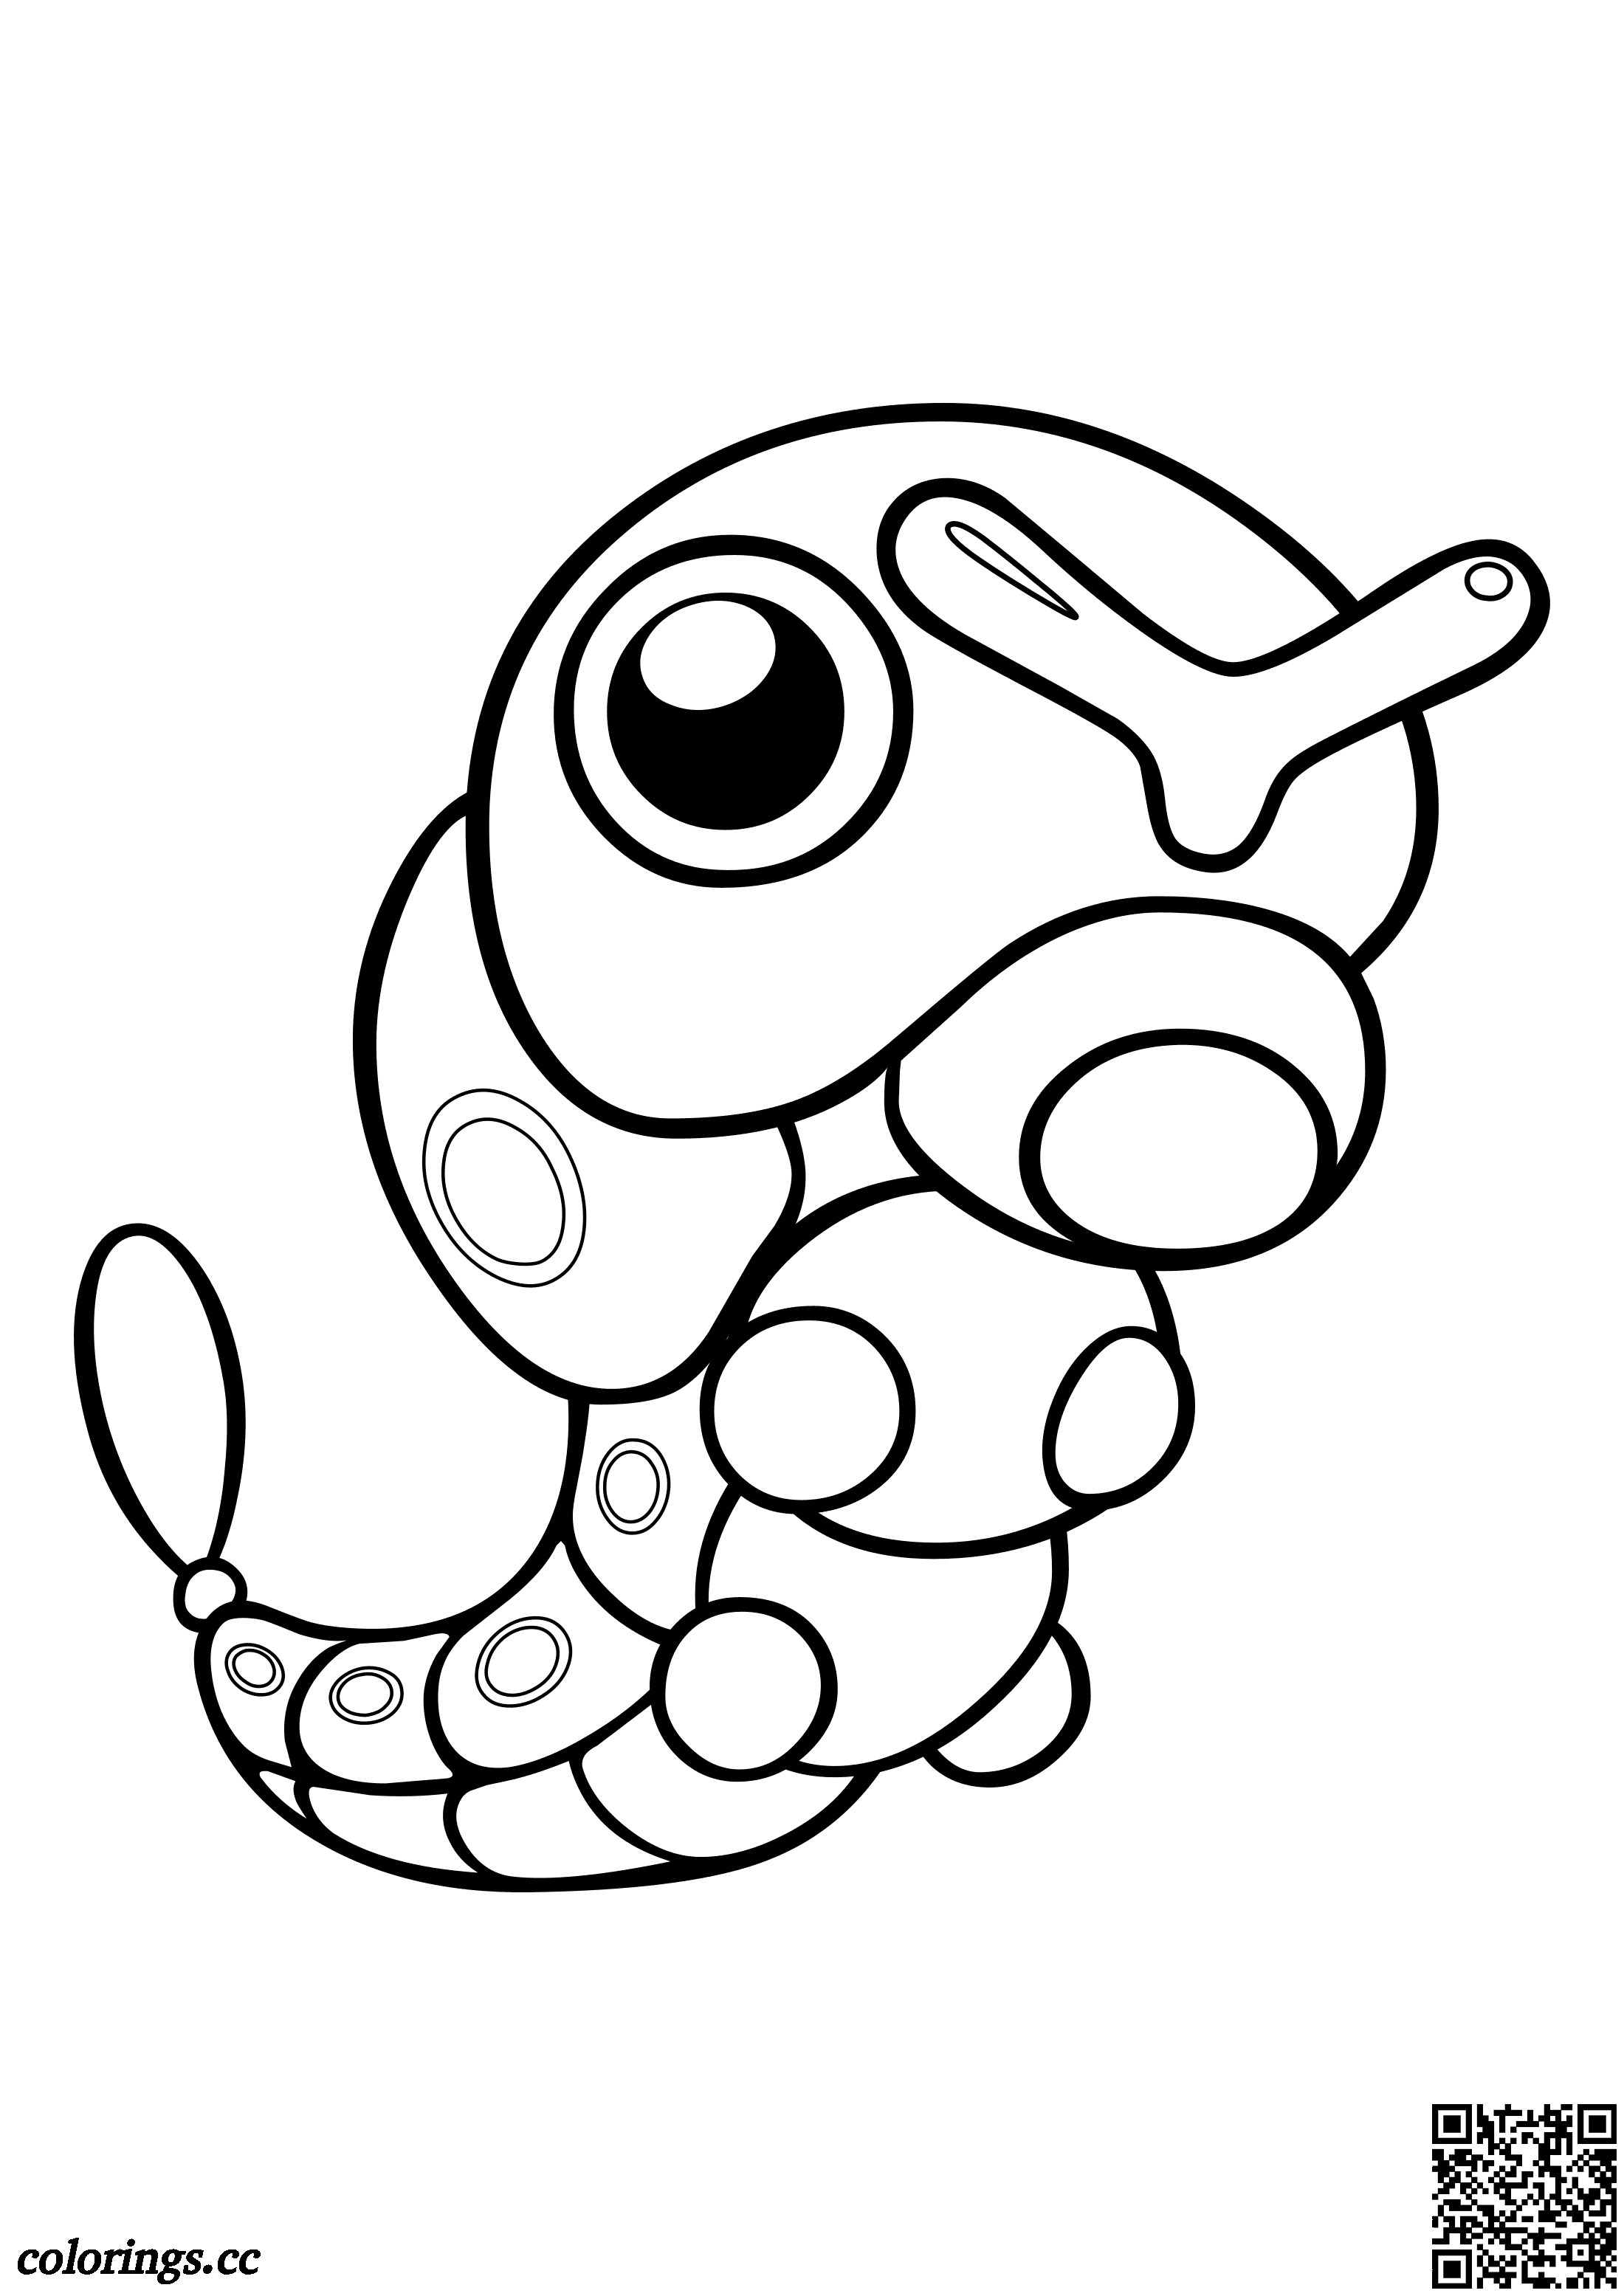 010 - Caterpie coloring pages, Pokemon coloring pages - Colorings.cc